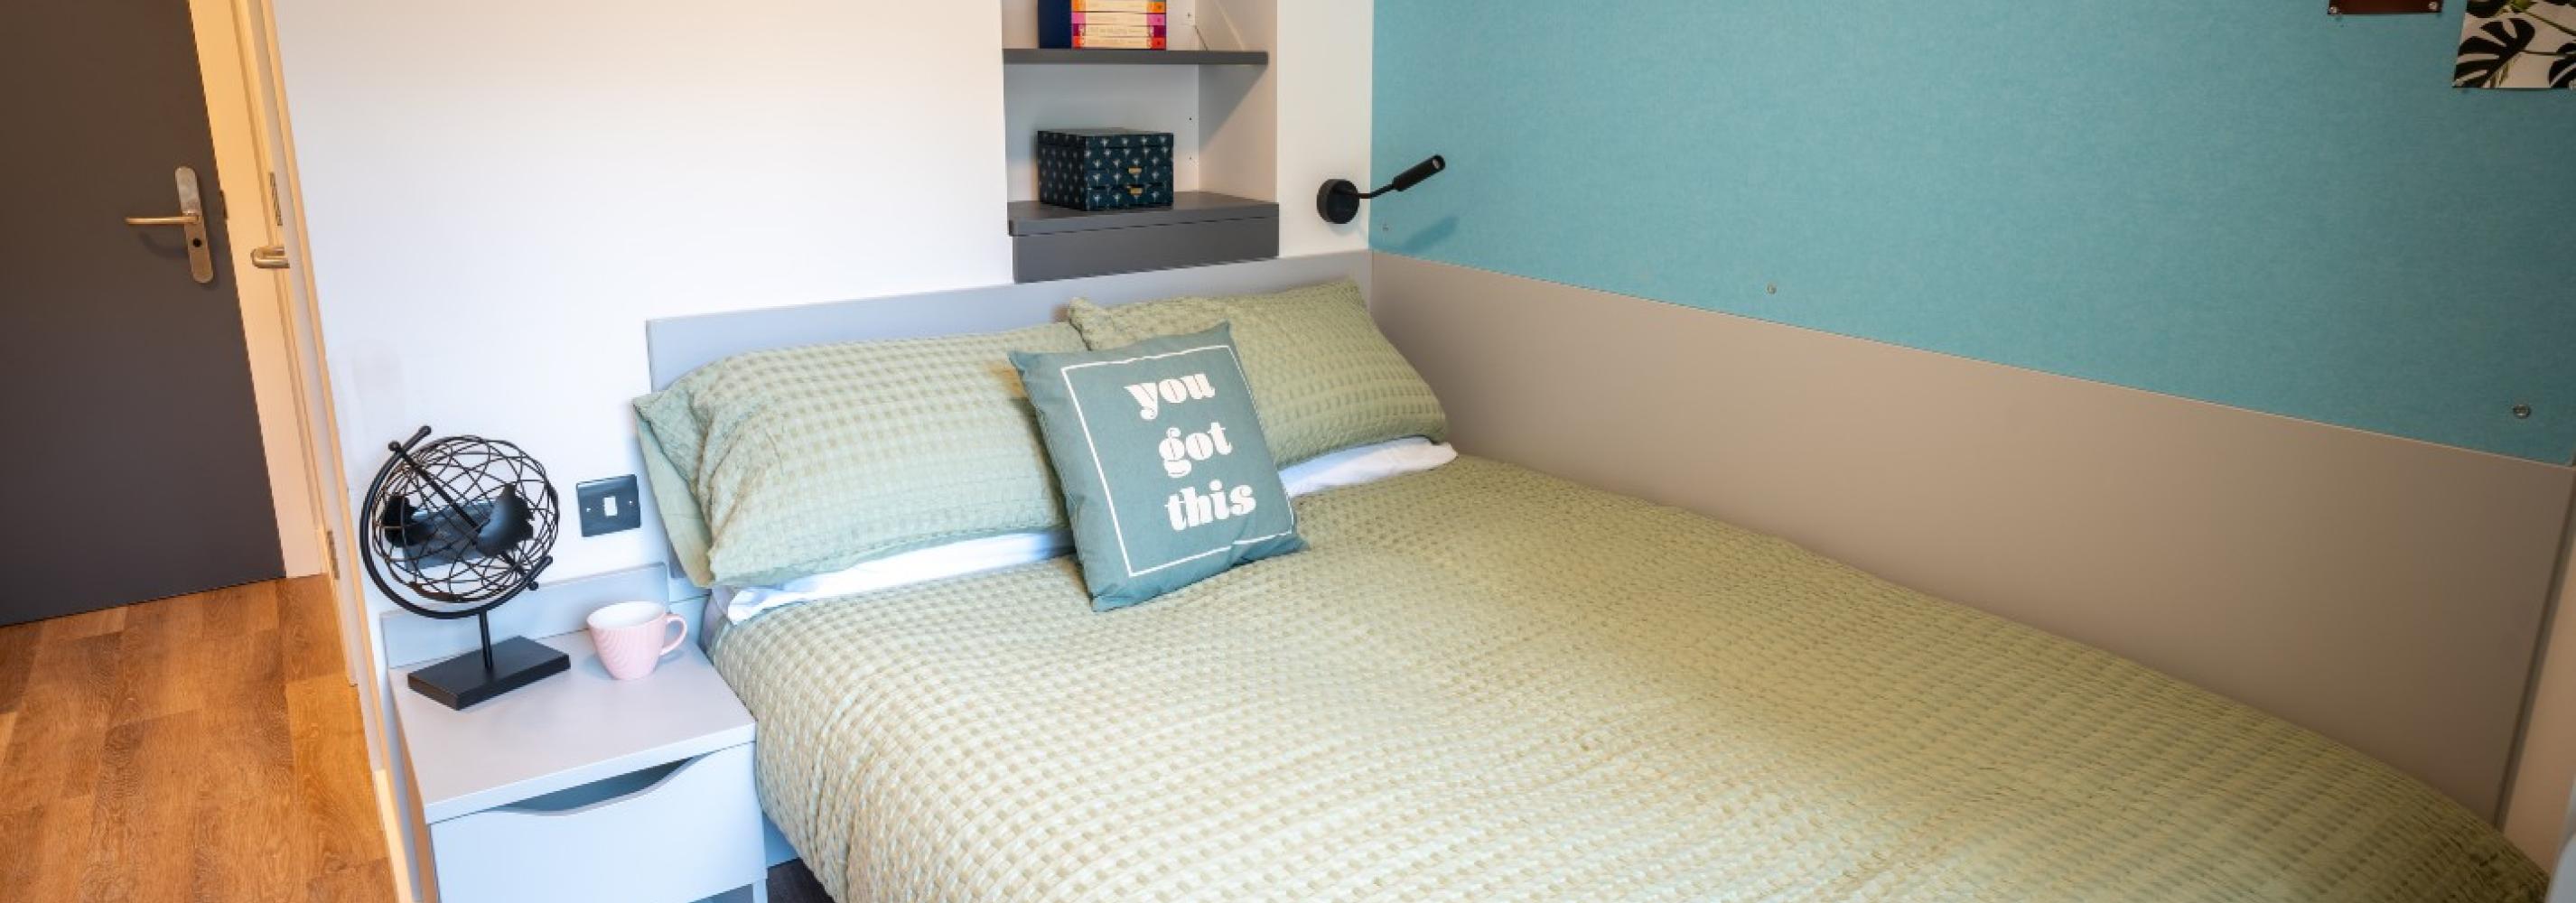 Modern bedroom. Blue and Green theme. Double bed, bedside table and behind the bed shelving.